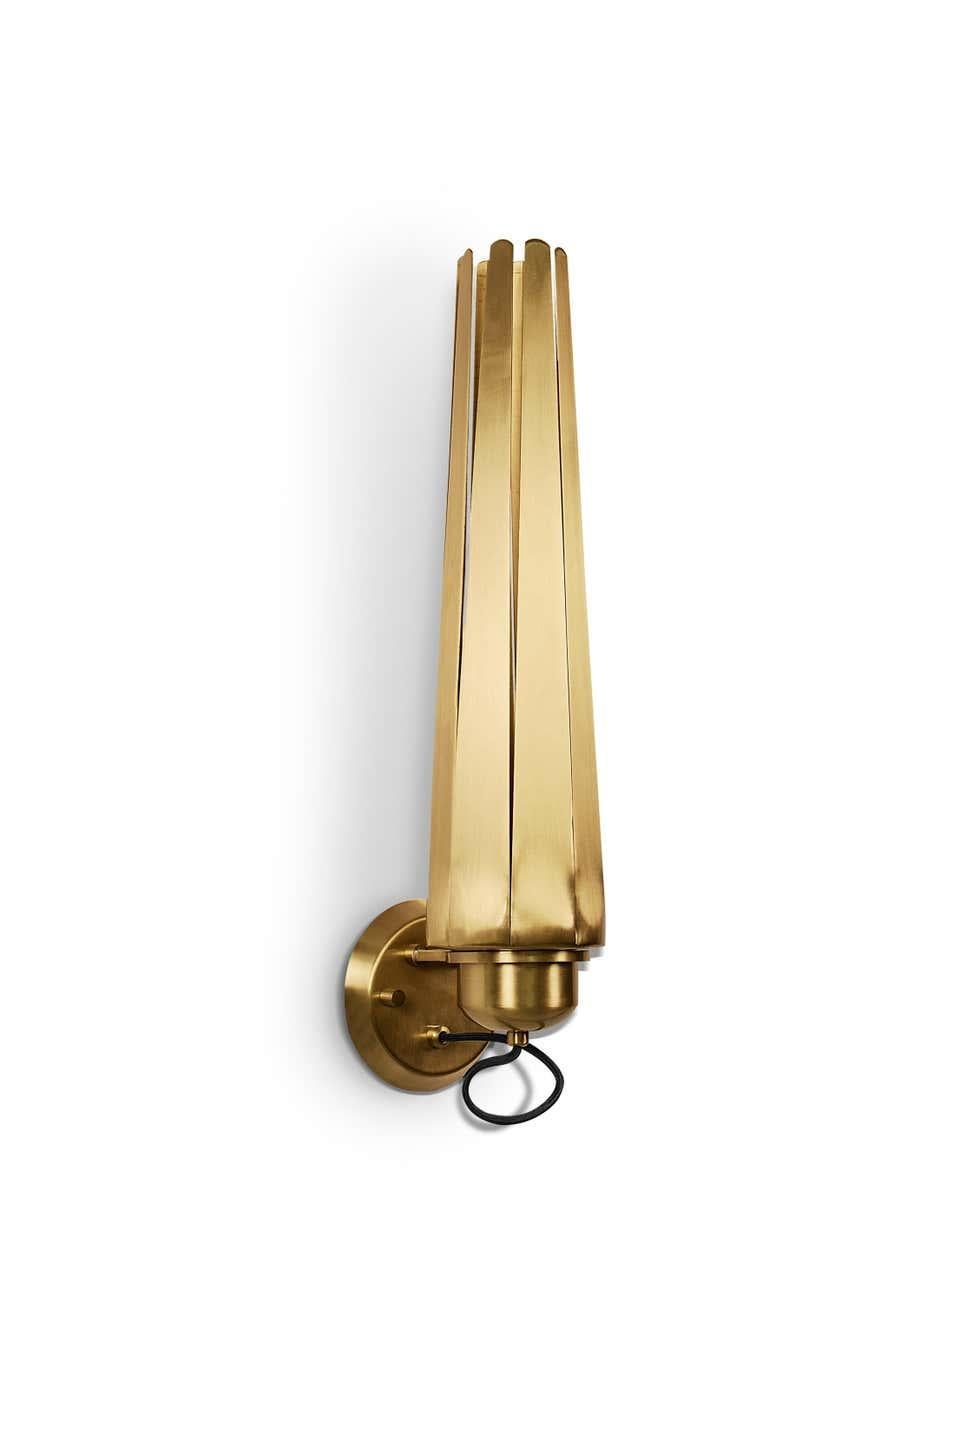 Contemporary Sconce in Matte Brass For Sale